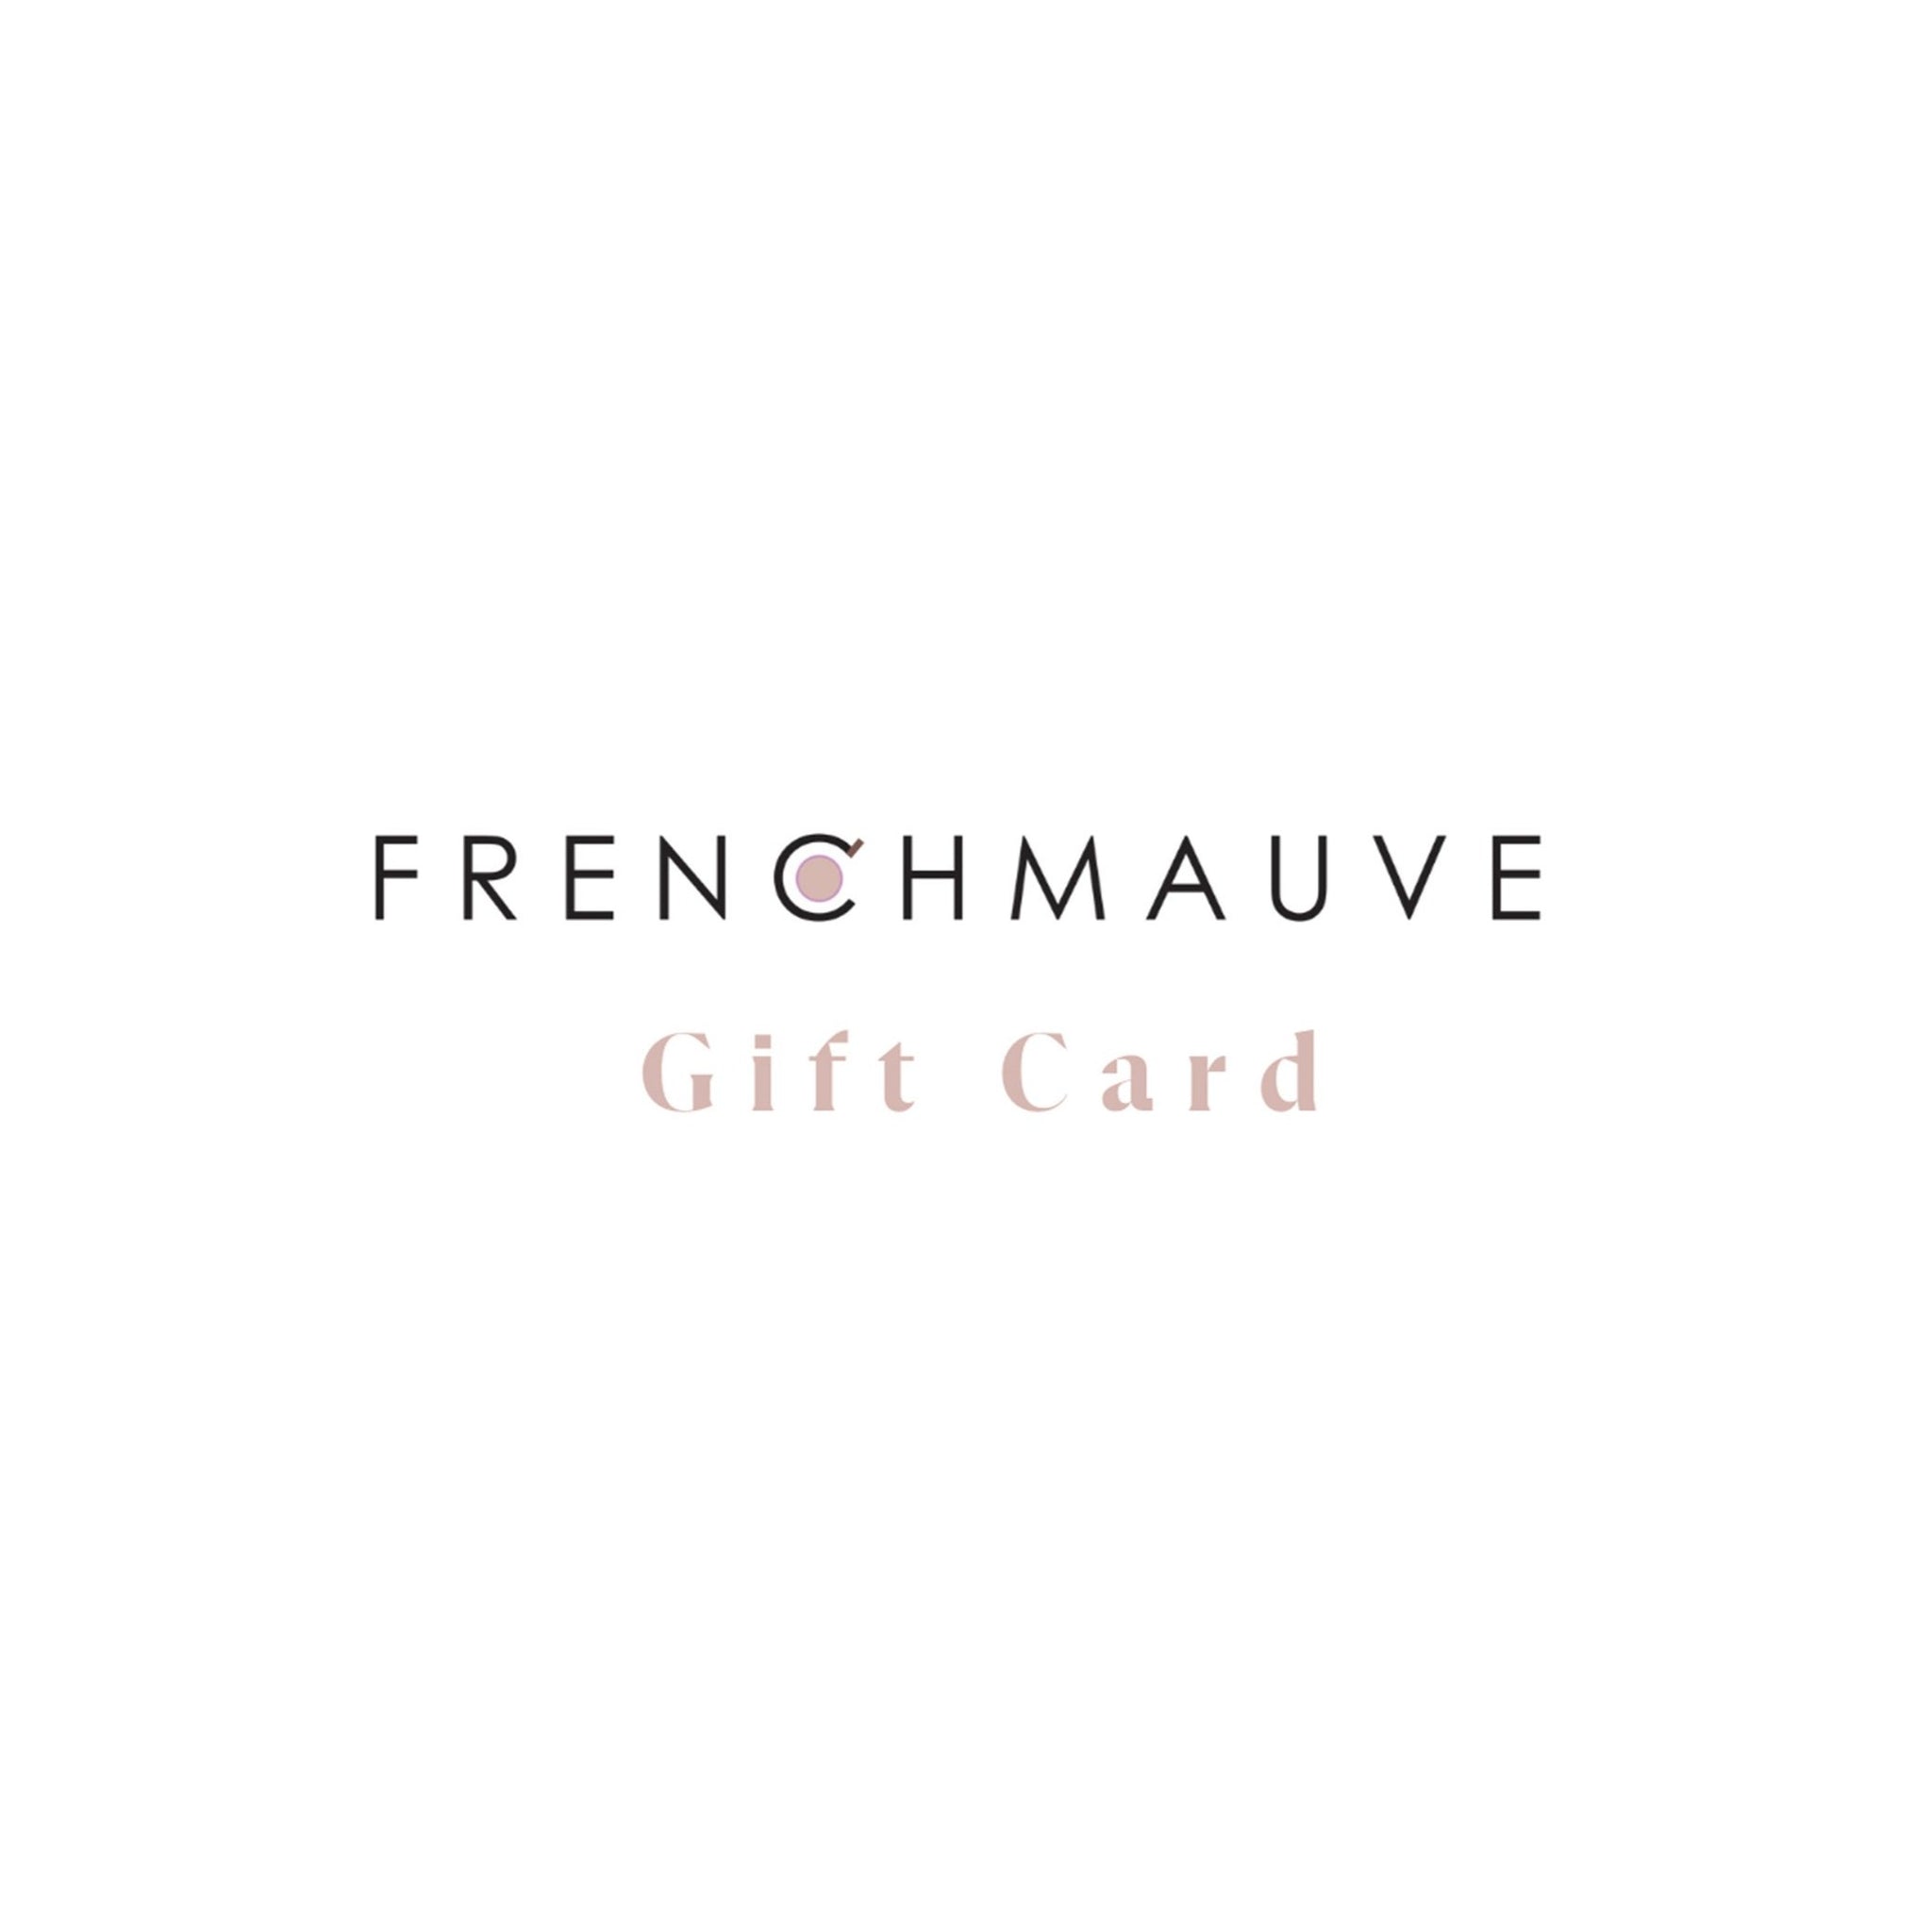 FRENCHMAUVE Gift Card